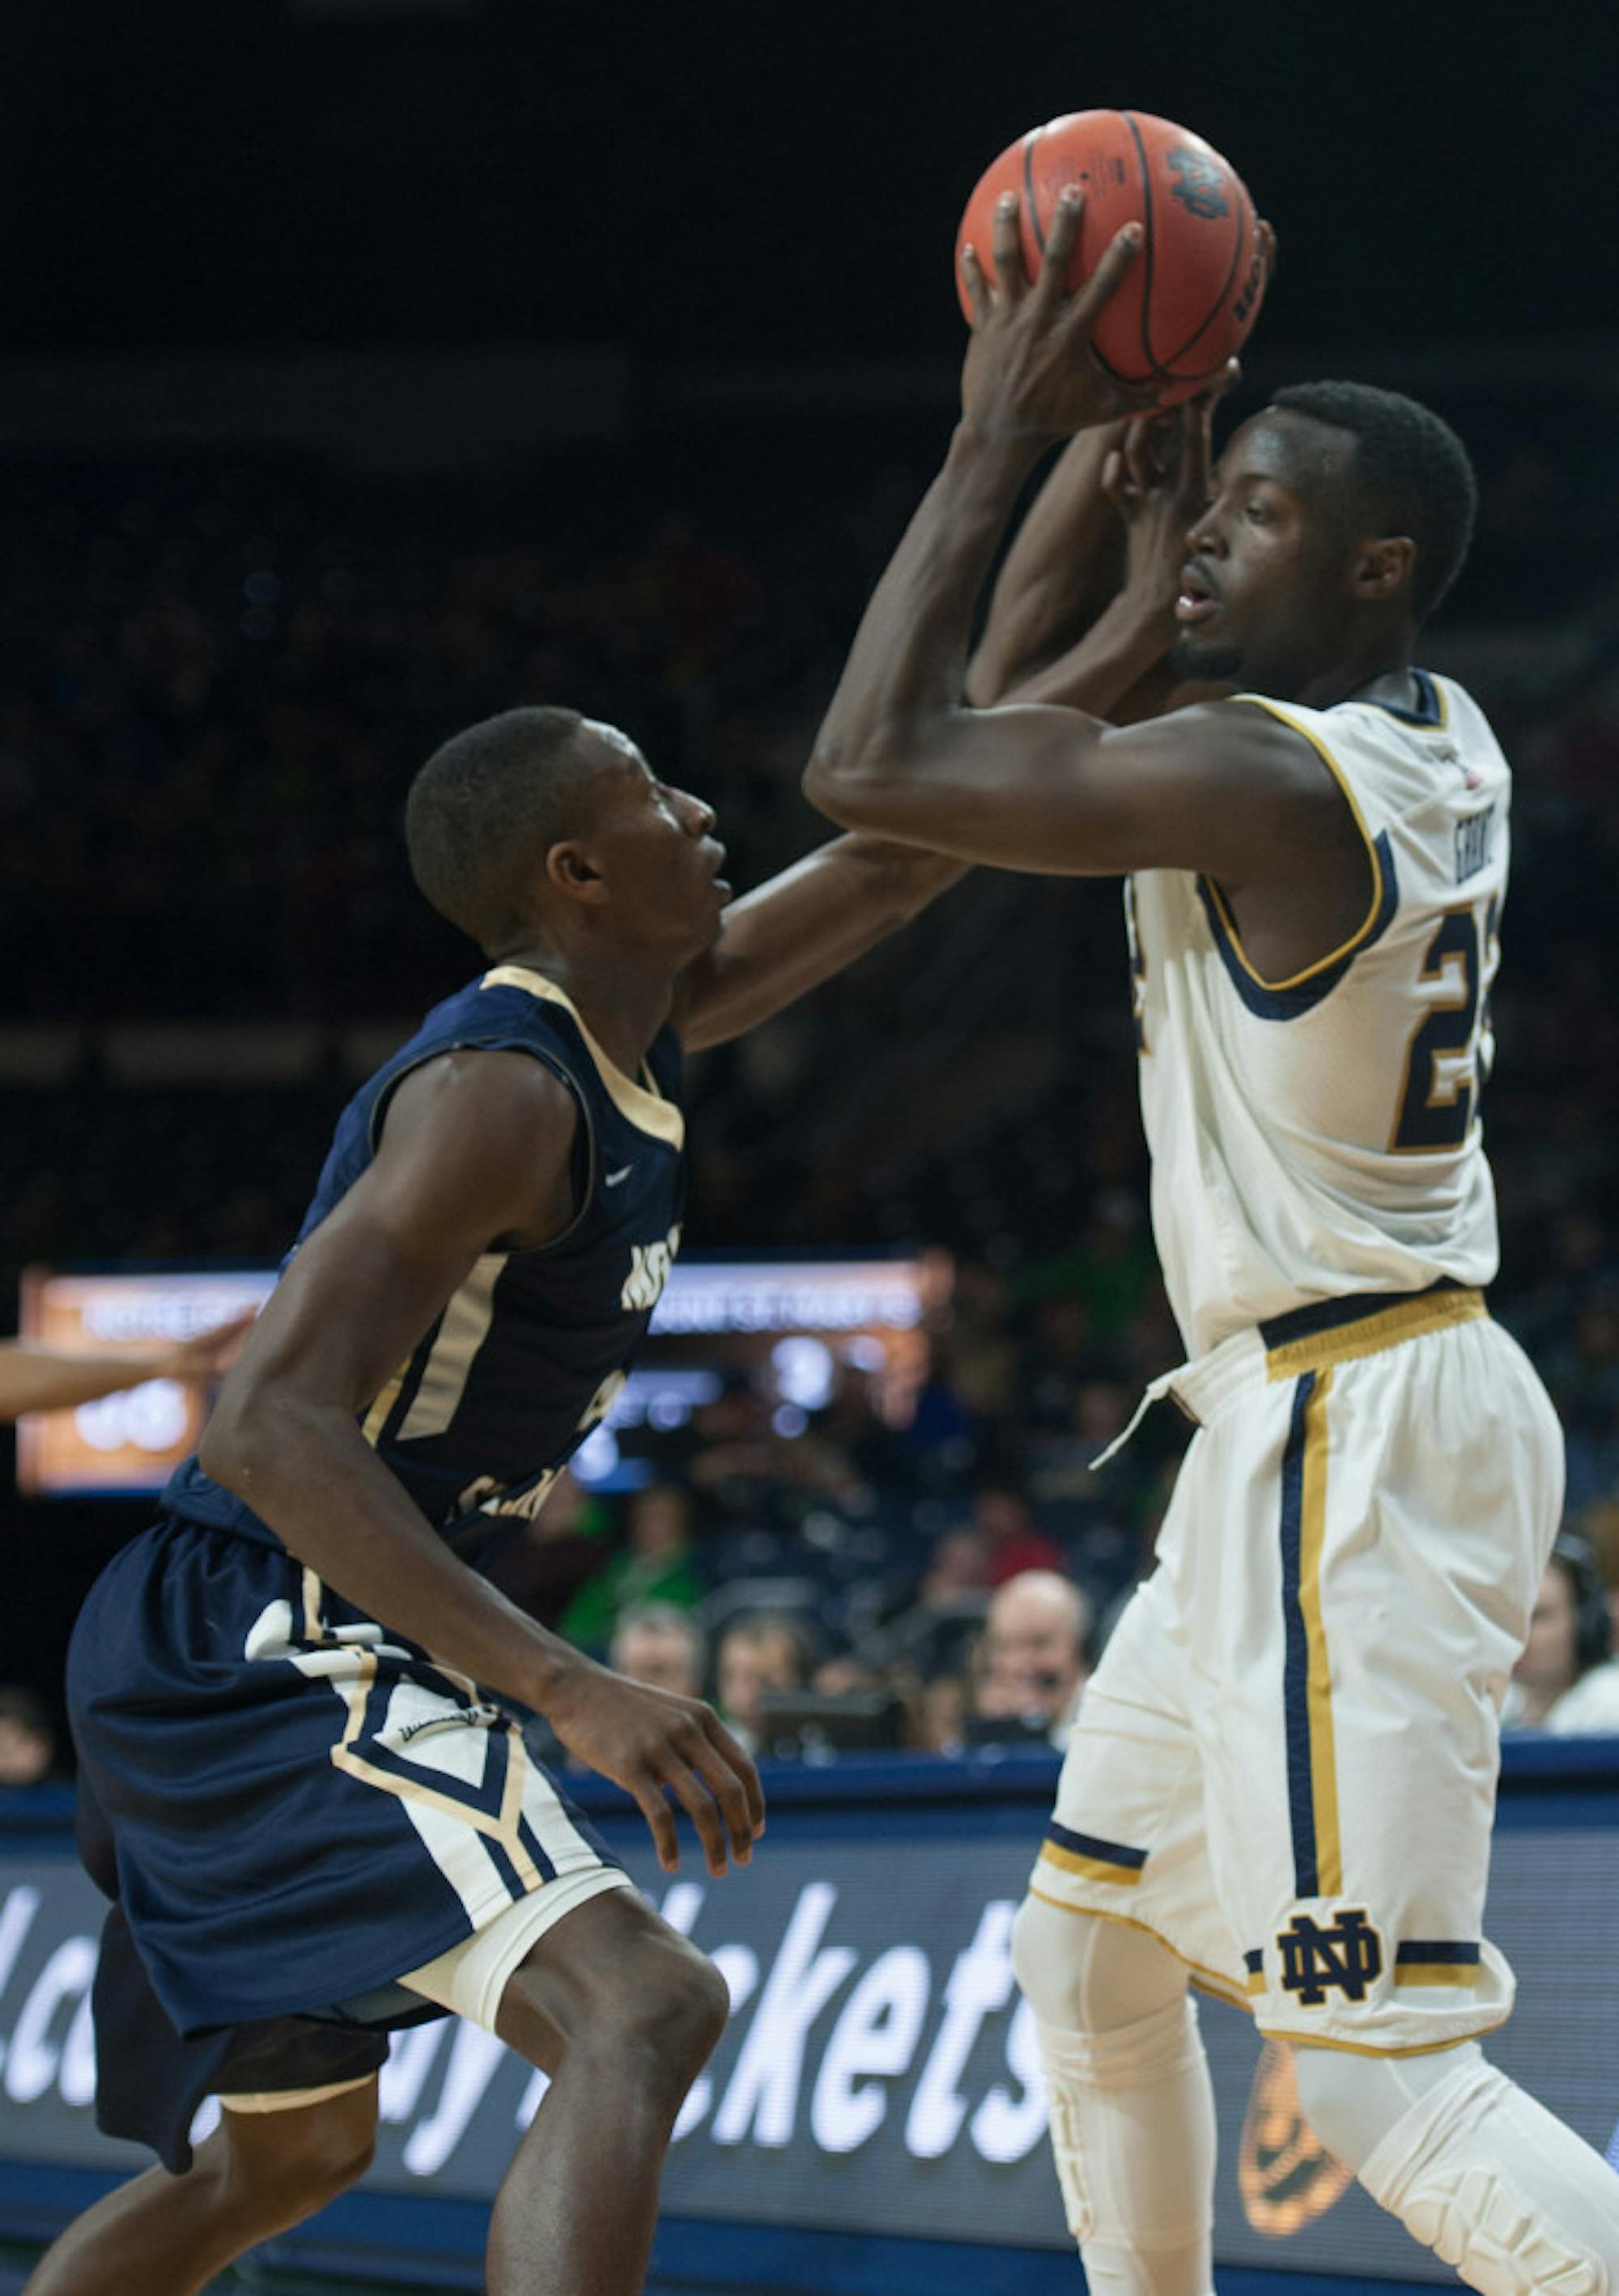 Irish senior guard Jerian Grant protects the ball during Notre Dame’s 93-67 victory over Mount St. Mary’s on Dec. 9.